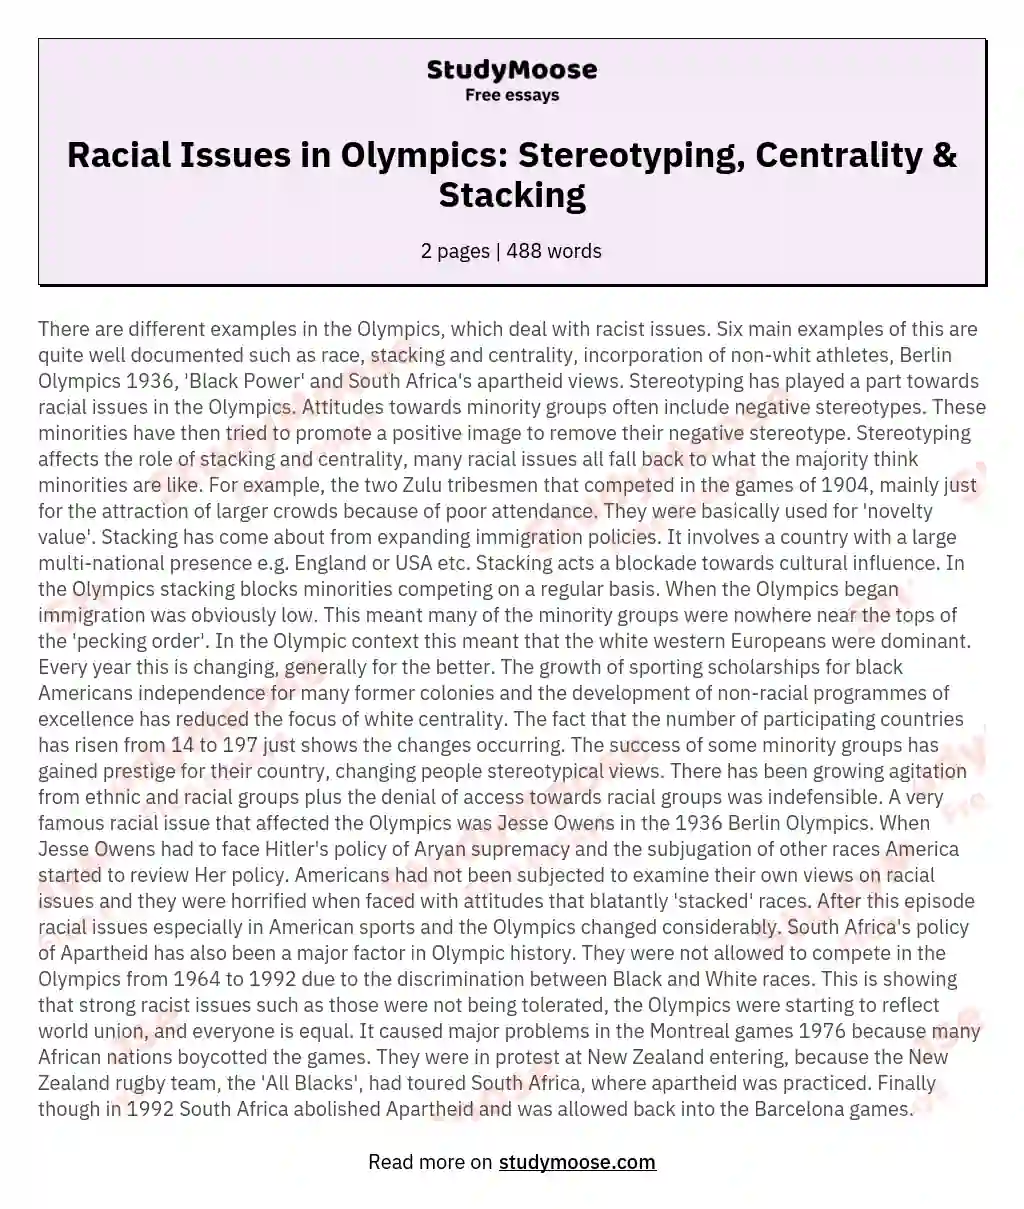 Racial Issues in Olympics: Stereotyping, Centrality & Stacking essay